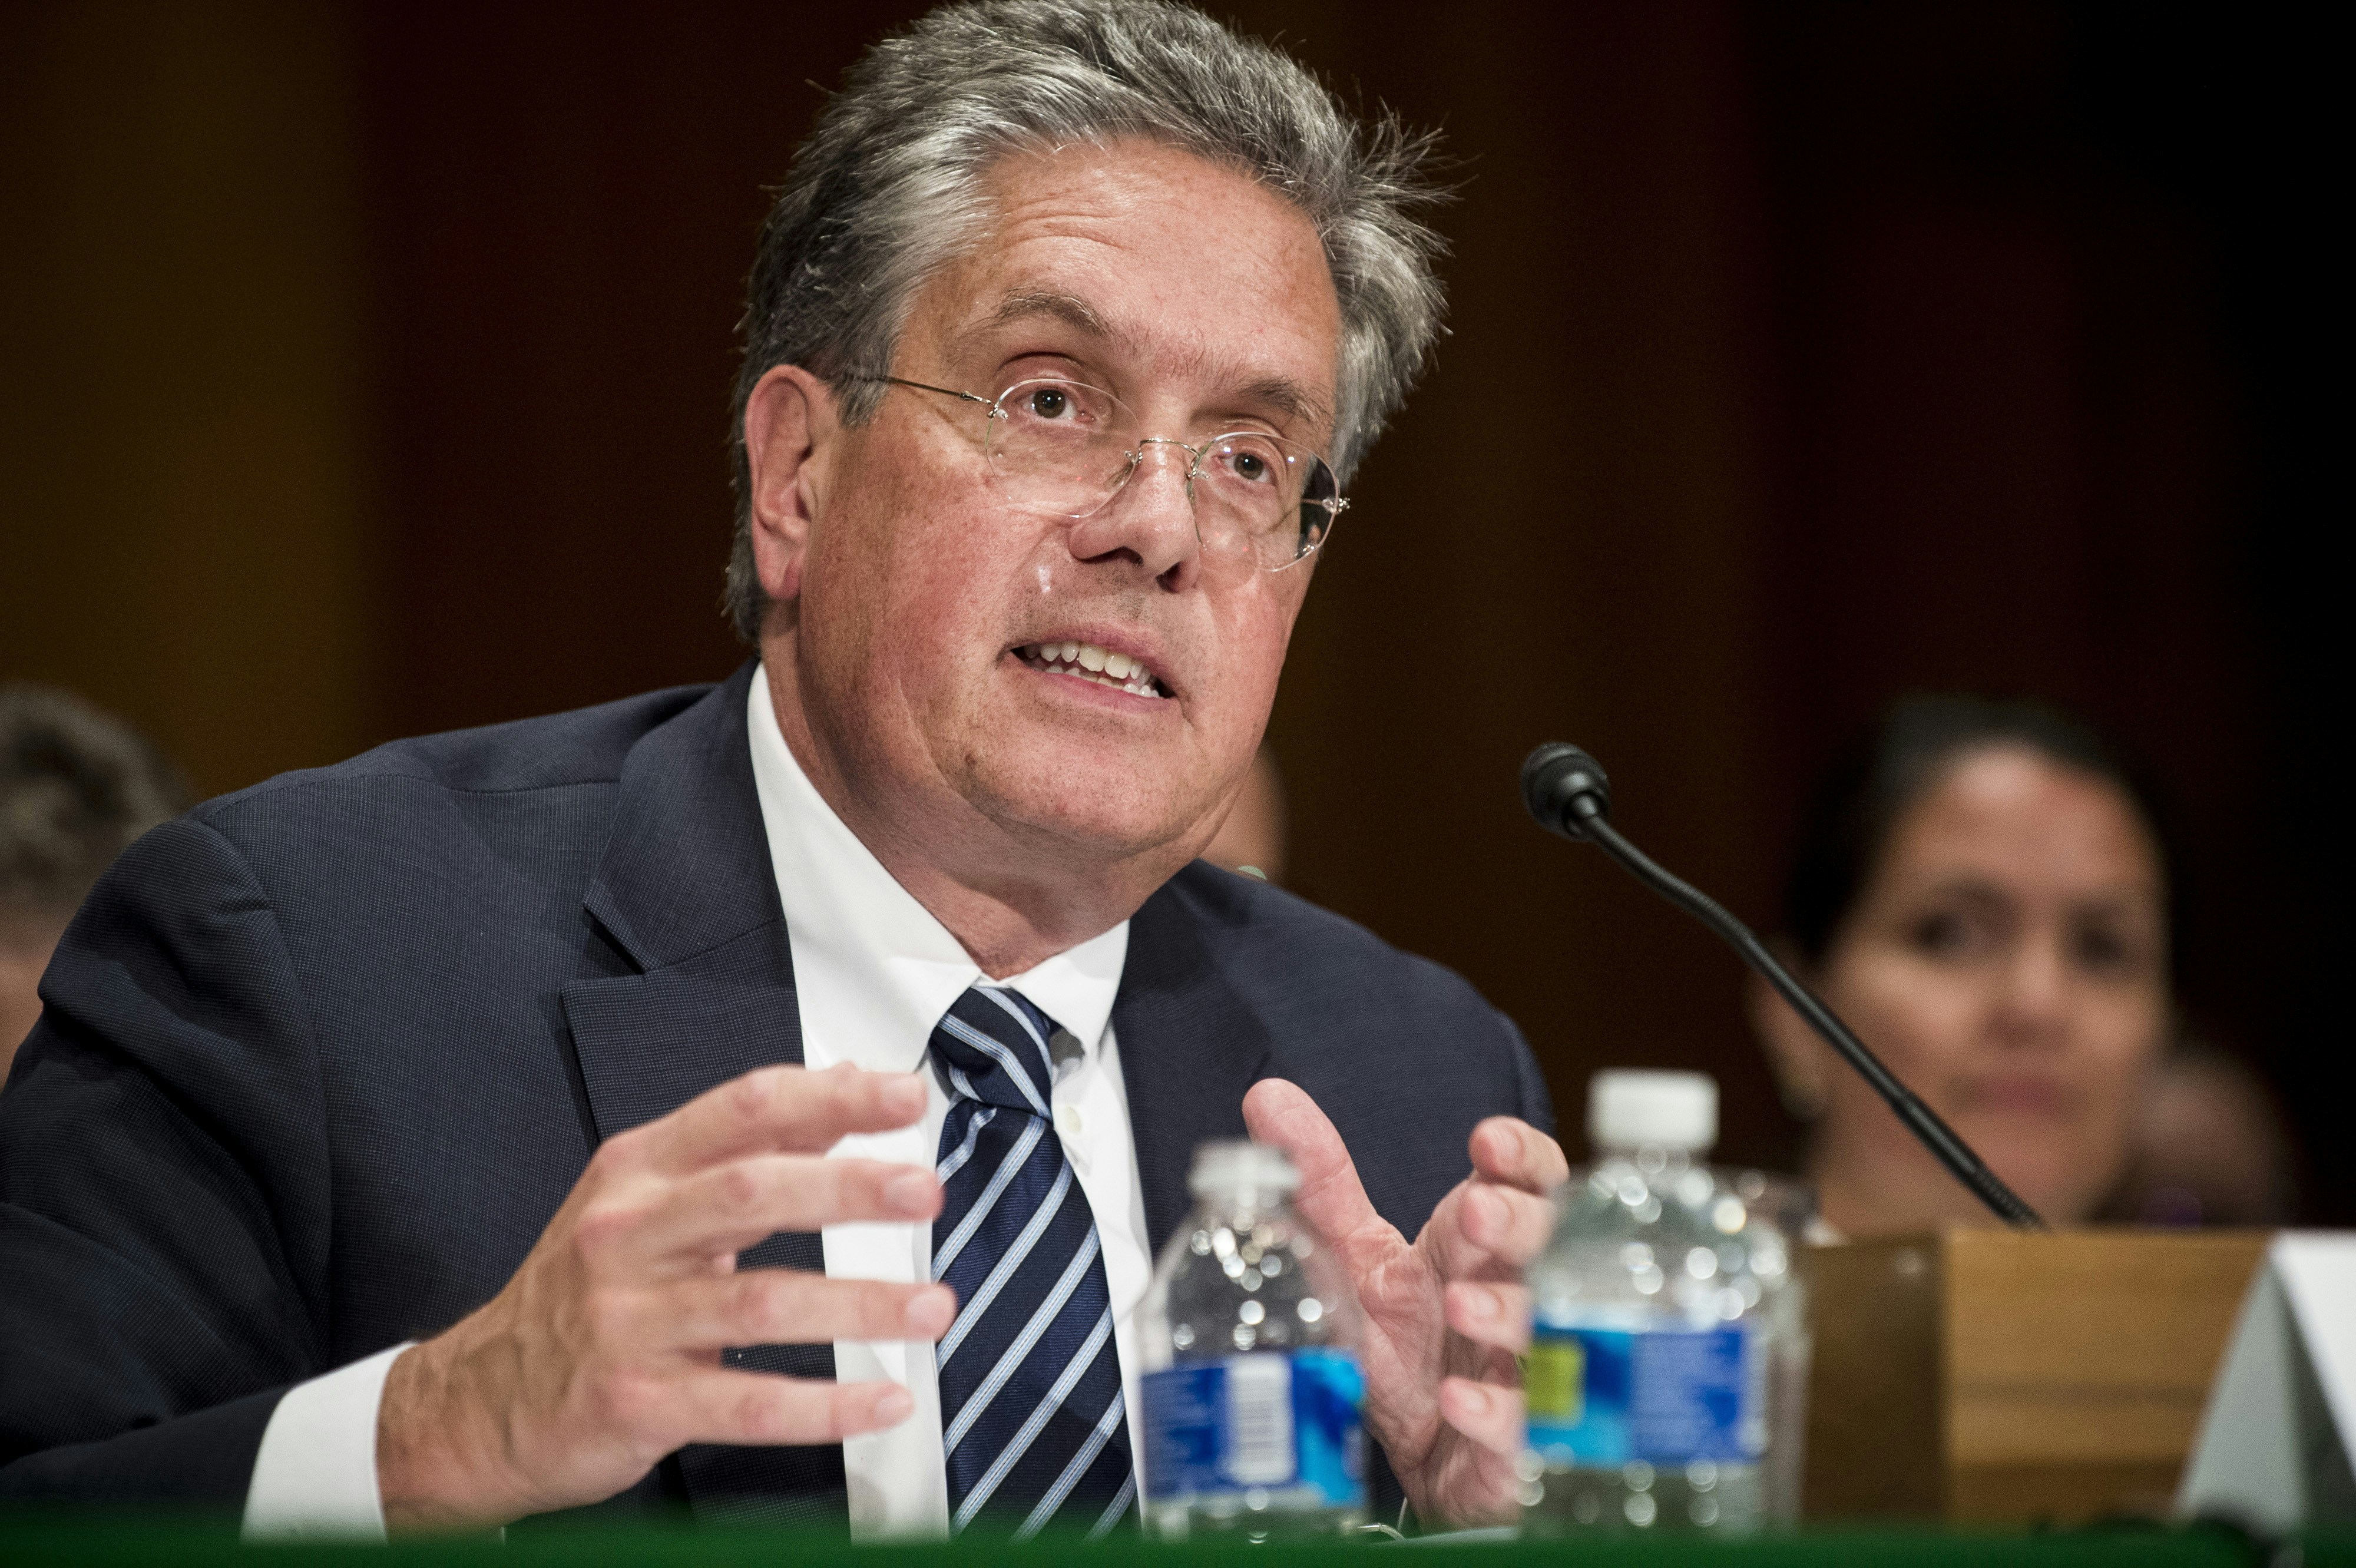 Thomas "Tom" Curry, comptroller of the U.S. currency, testifies before the Senate Committee on Banking, Housing, and Urban Affairs in Washington, D.C., on Sept. 20, 2016.